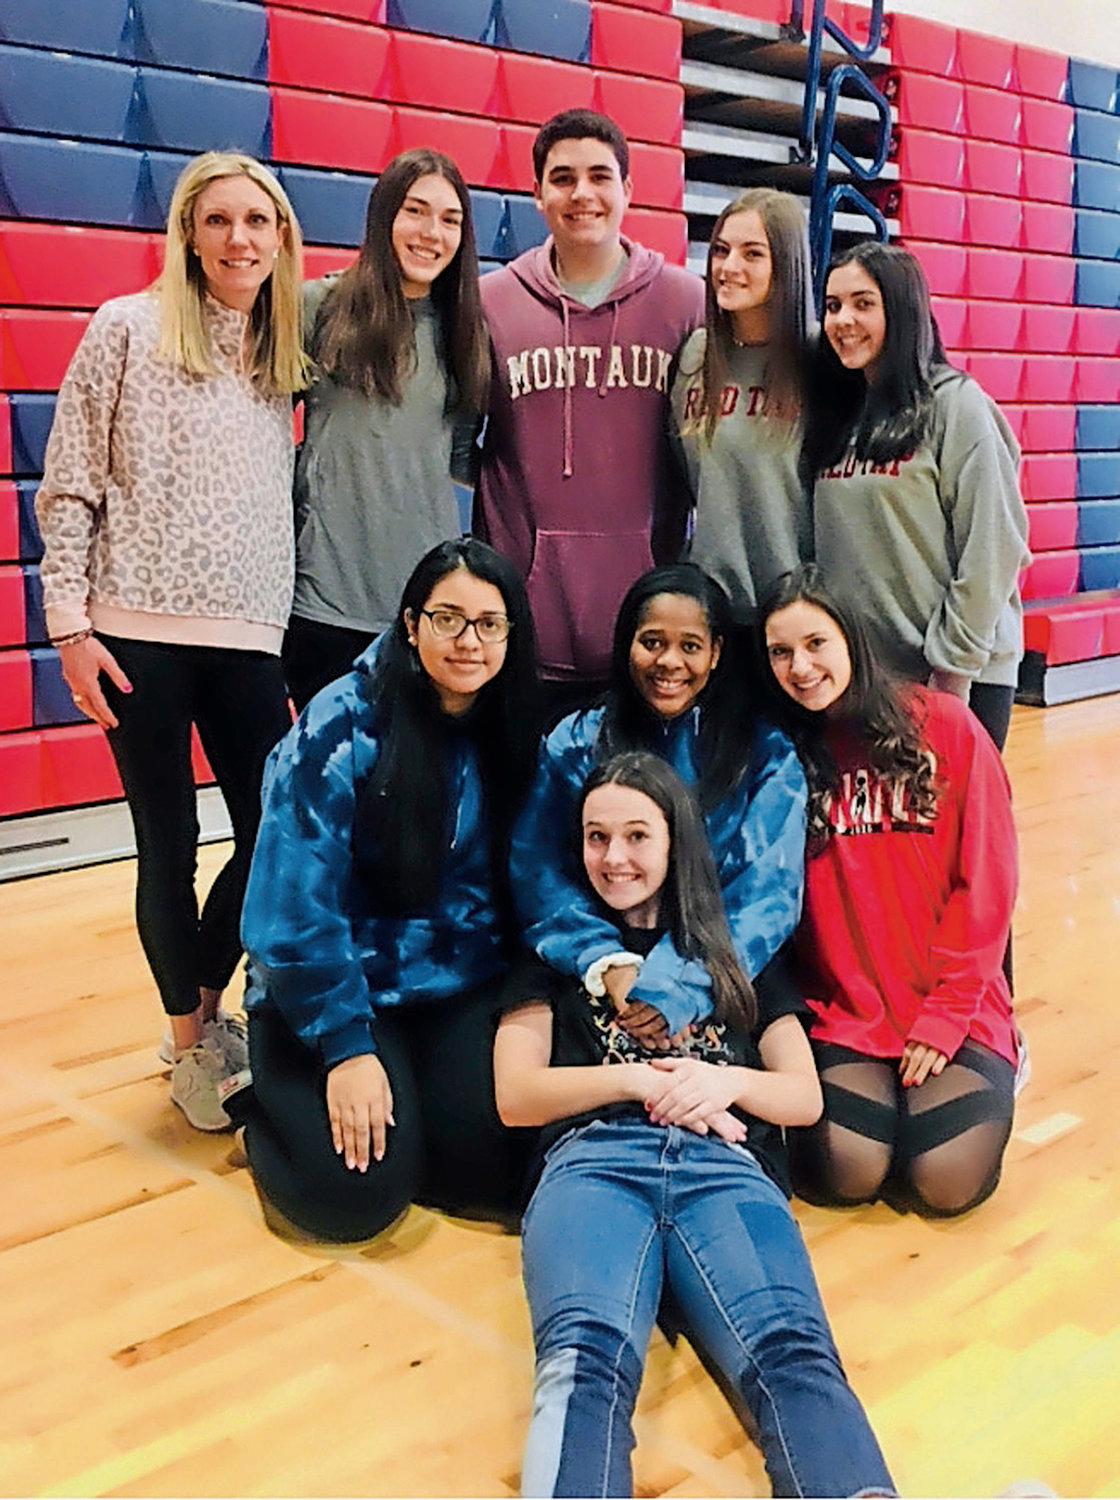 Liz Marshall, a physical education teacher and S.A.F.E. Club advisor, top left, joined student club leader Madison Gamberg, Lio Grillo, Bella Adipietro, Kiersten Quirk, Janelle Melendez, Ashlyn Beauge, Montana Mawhinney and Madeline Roberti last year.